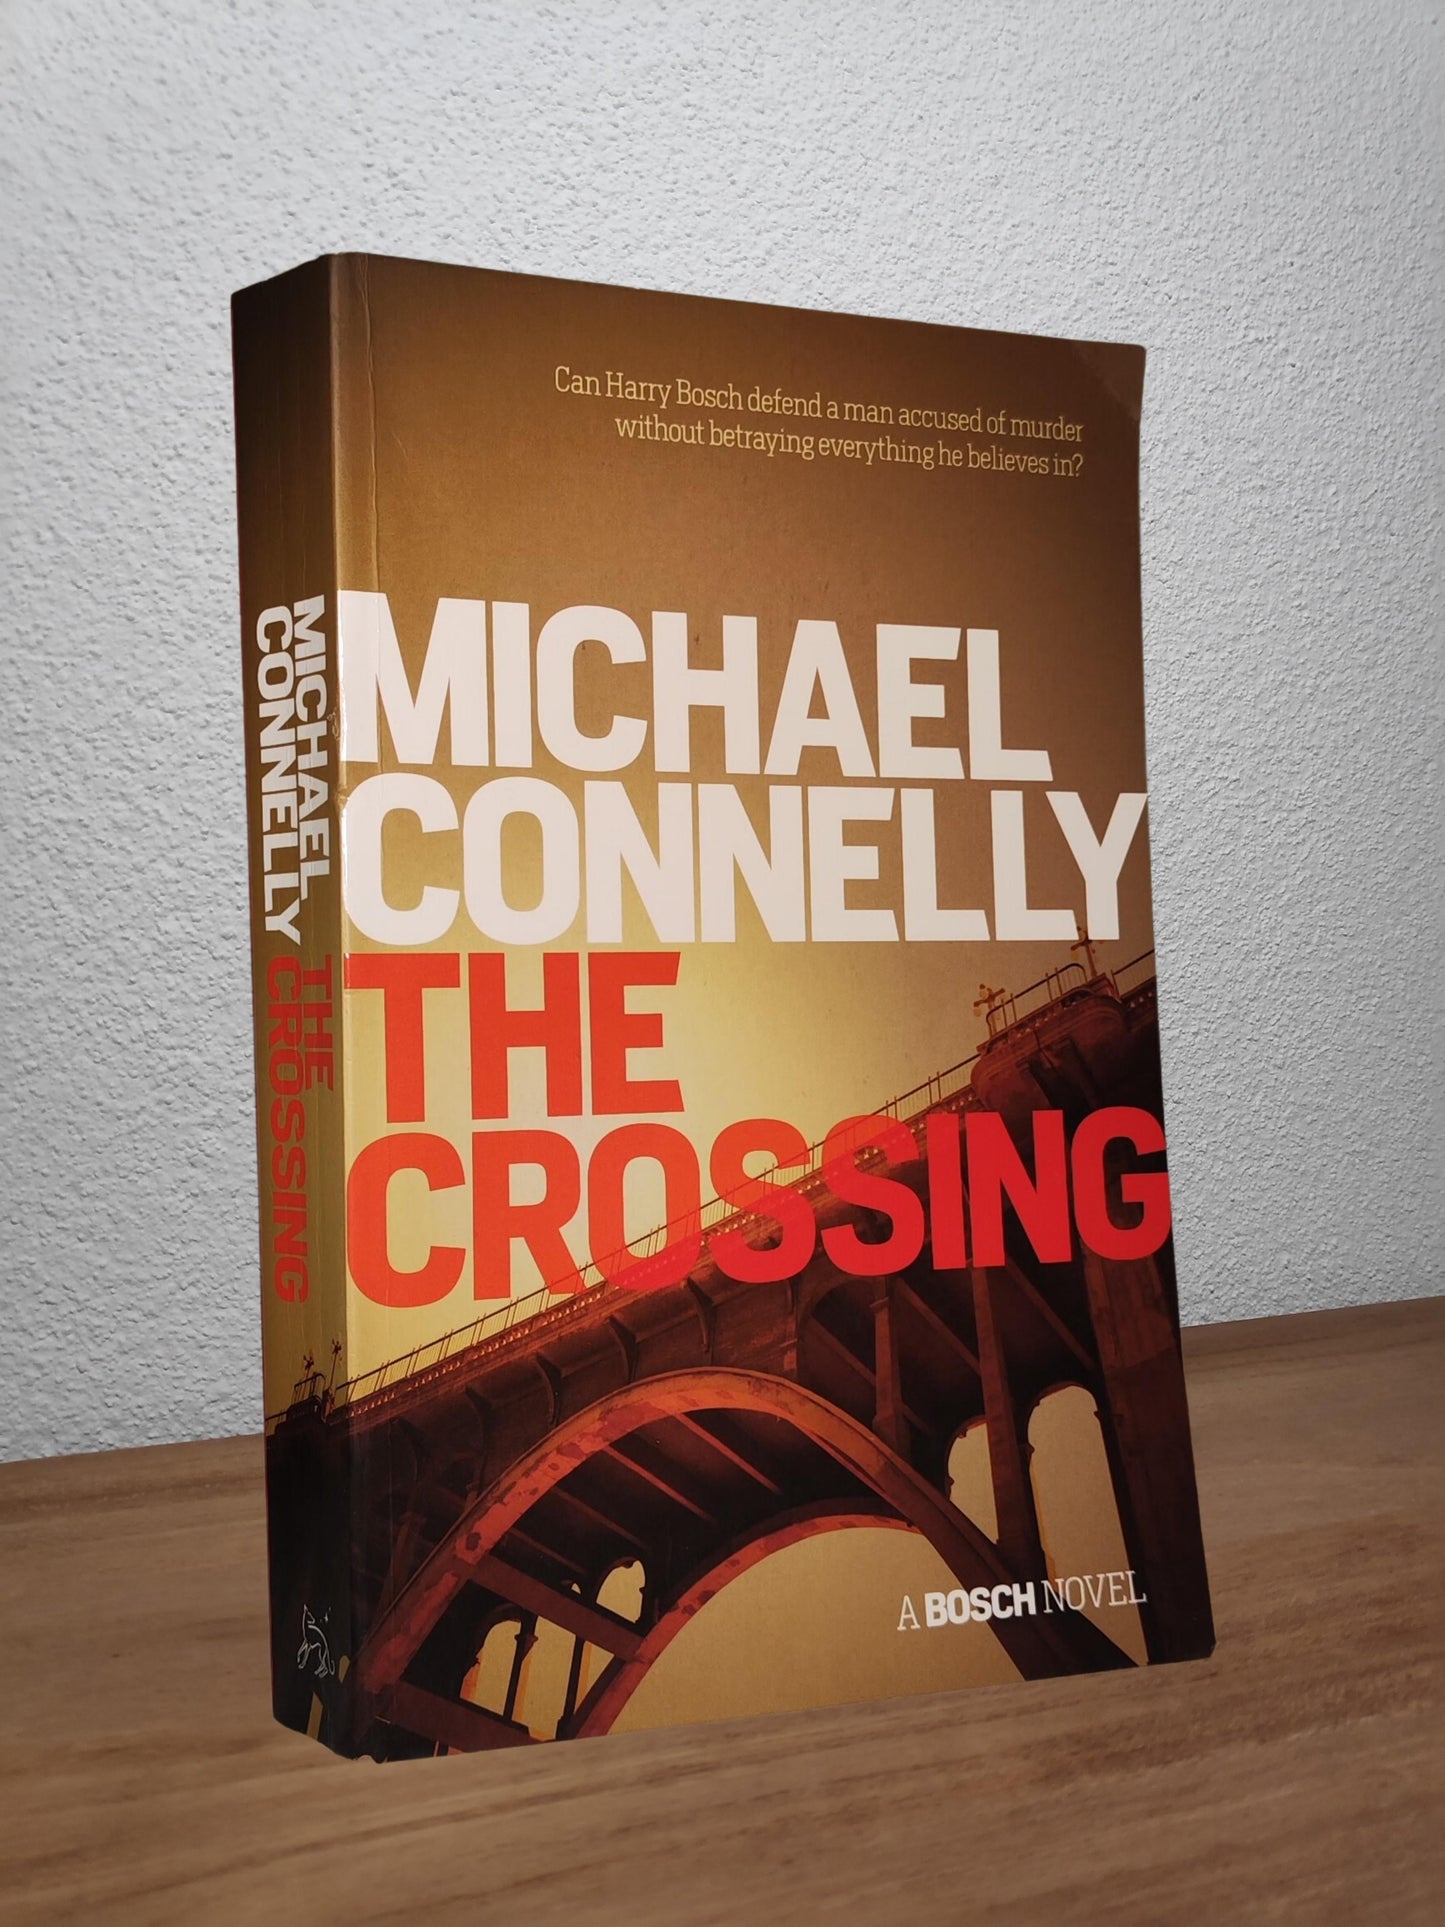 Michael Connelly - The Crossing - Second-hand english book to deliver in Zurich & Switzerland